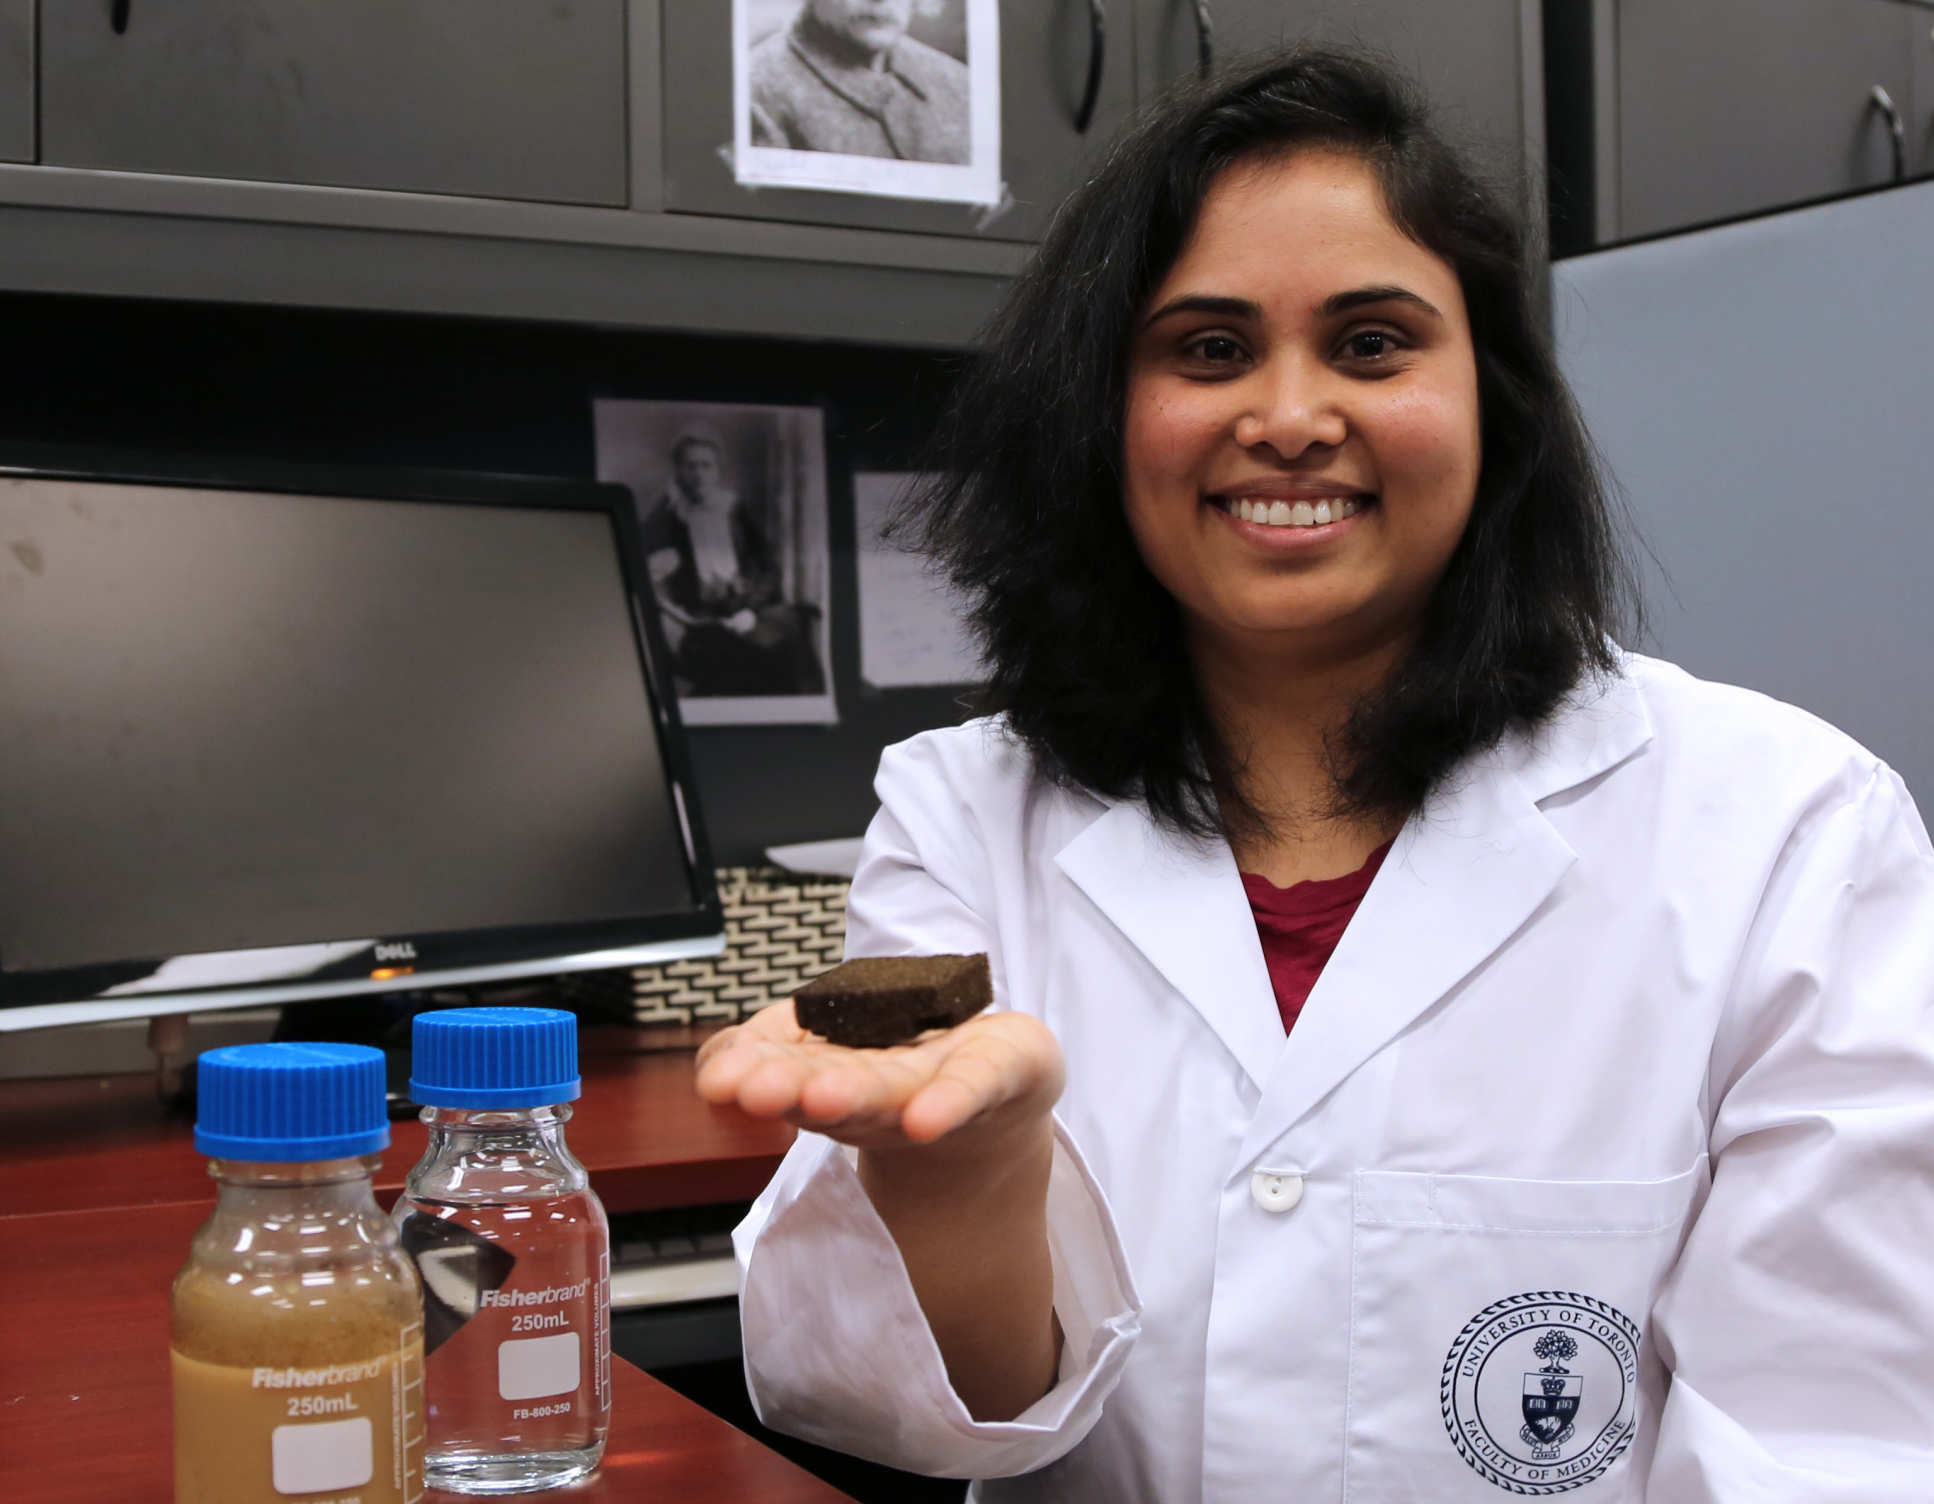 Photo of Dr Cherukupally with the sponge and 'before and after' water samples (one bottle containing brown liquid; the other, clear, clean liquid after sponge treatment) in her lab at the University of Toronto